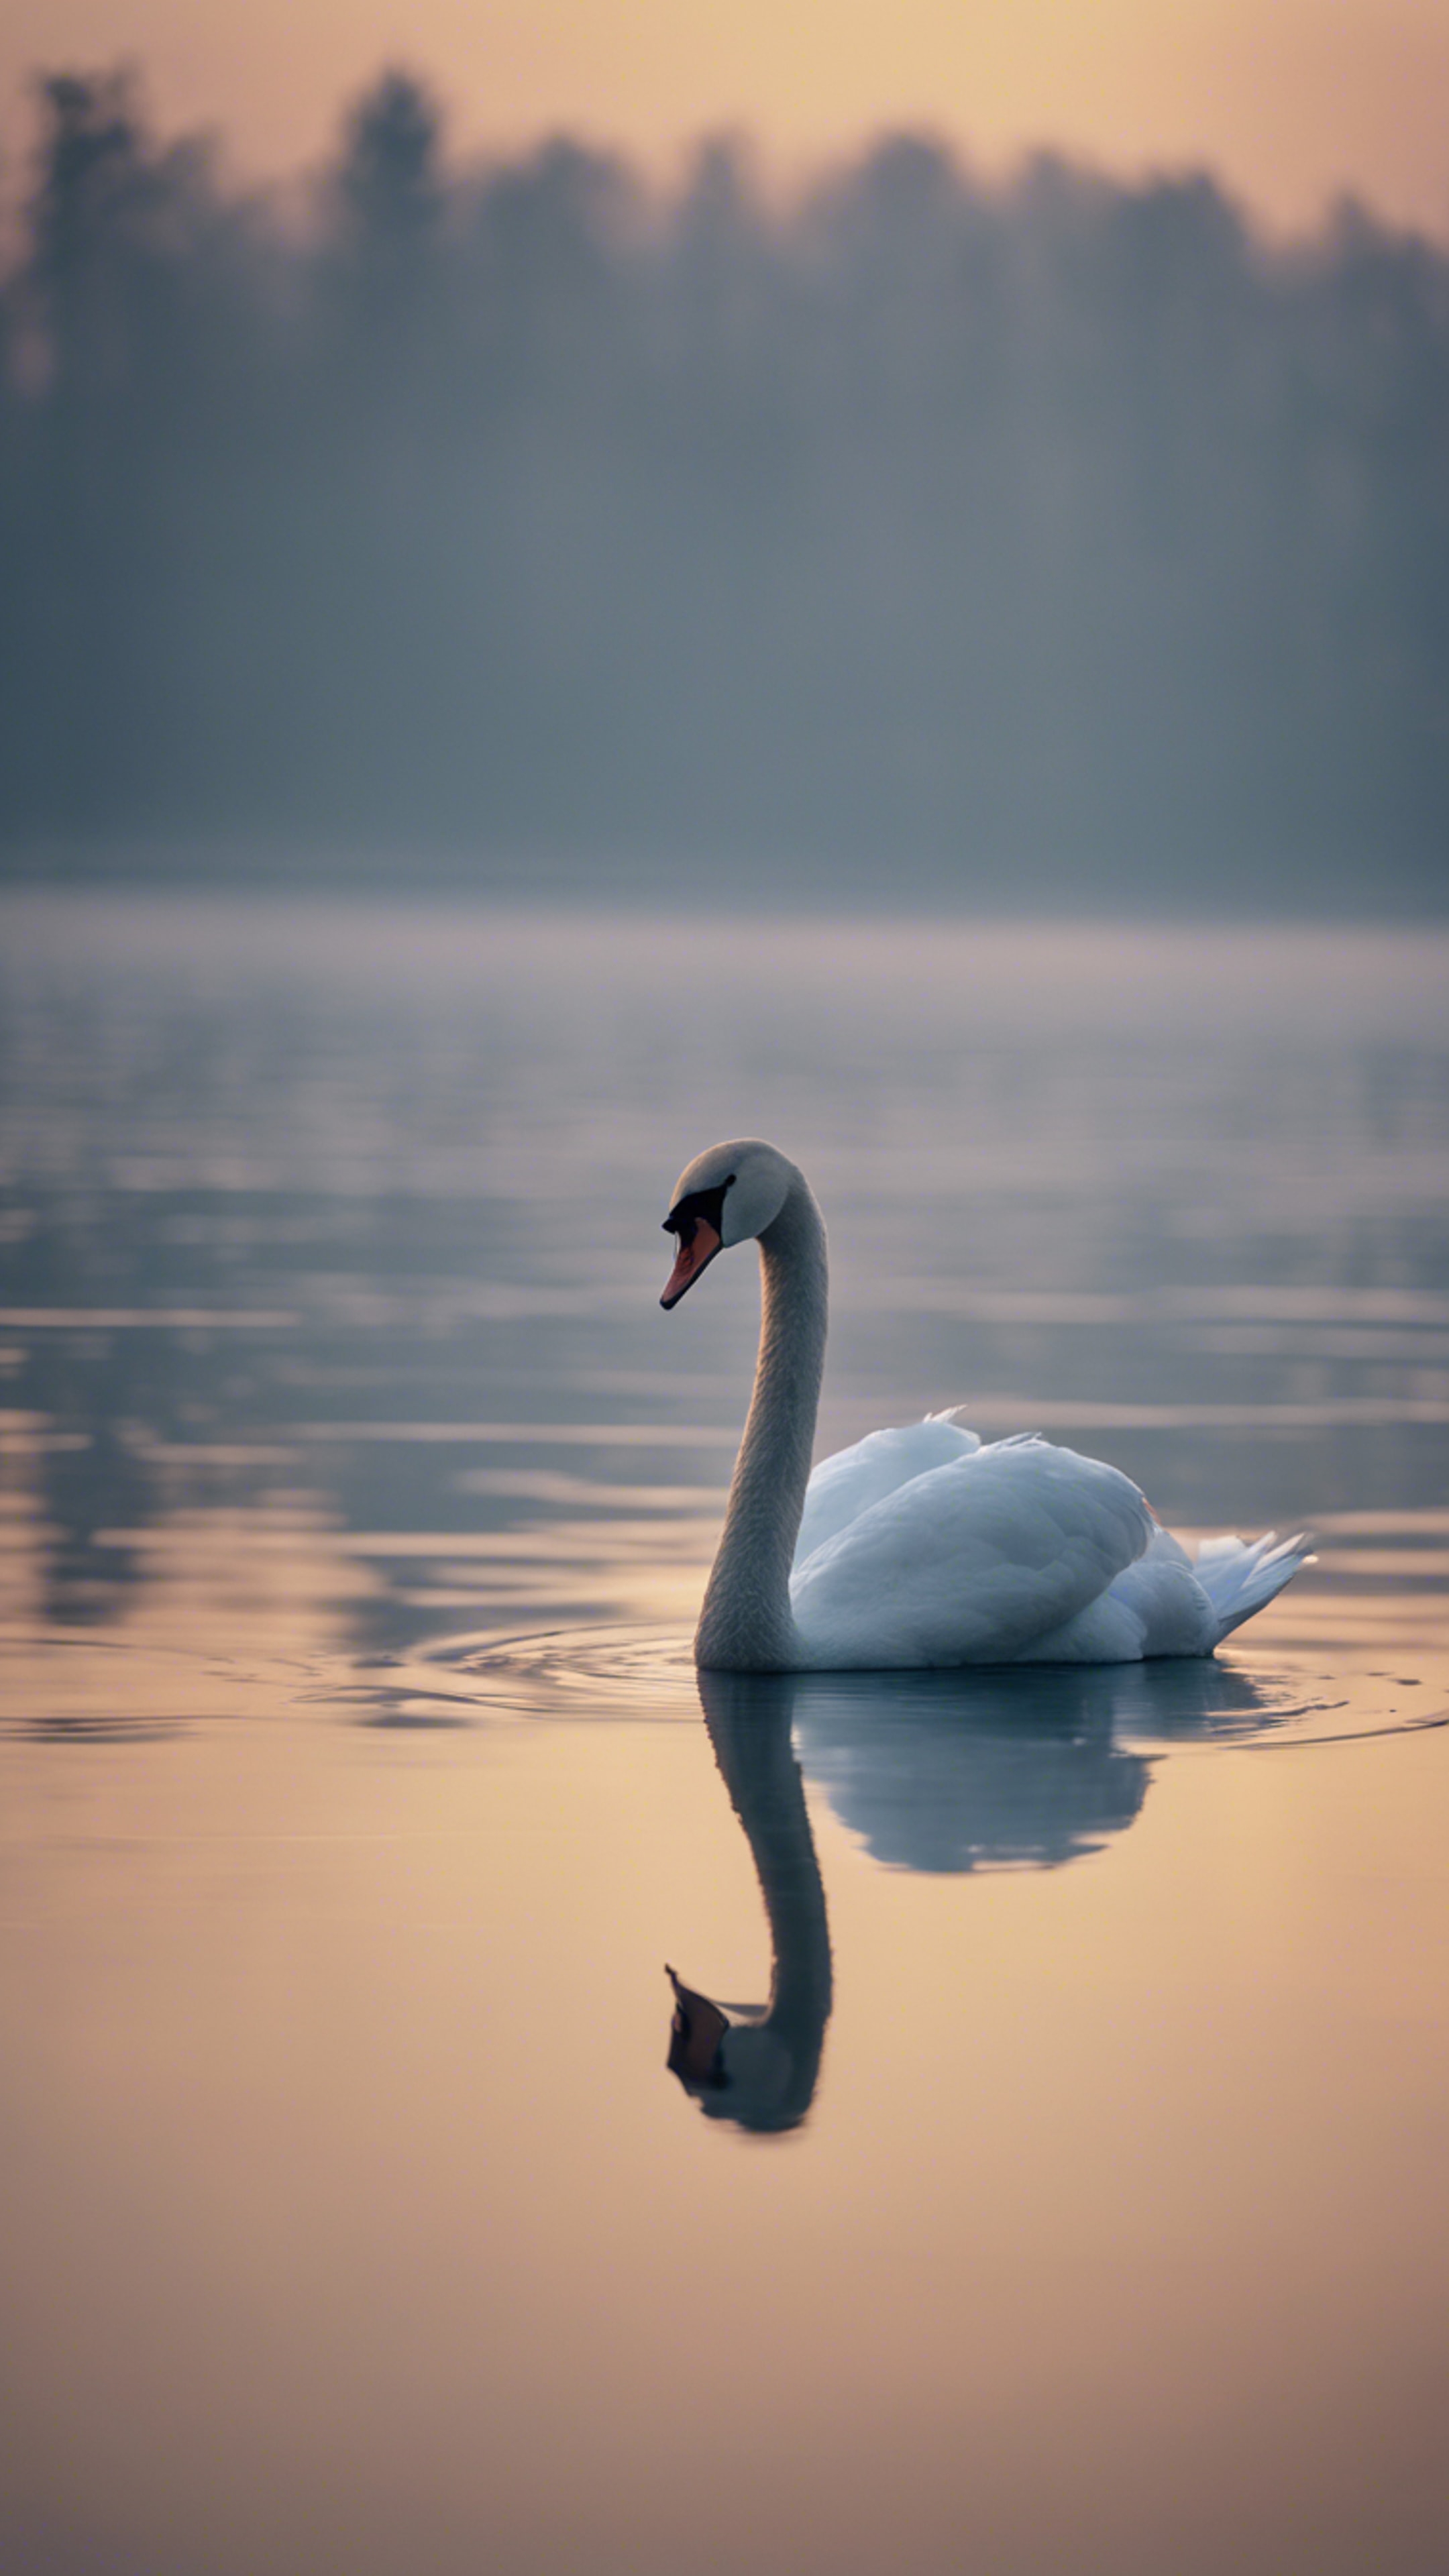 A single love-struck swan swimming alone in a desolate lake under the pallid glow of a gloomy moon. Tapet[674930fc7c9f467a8426]